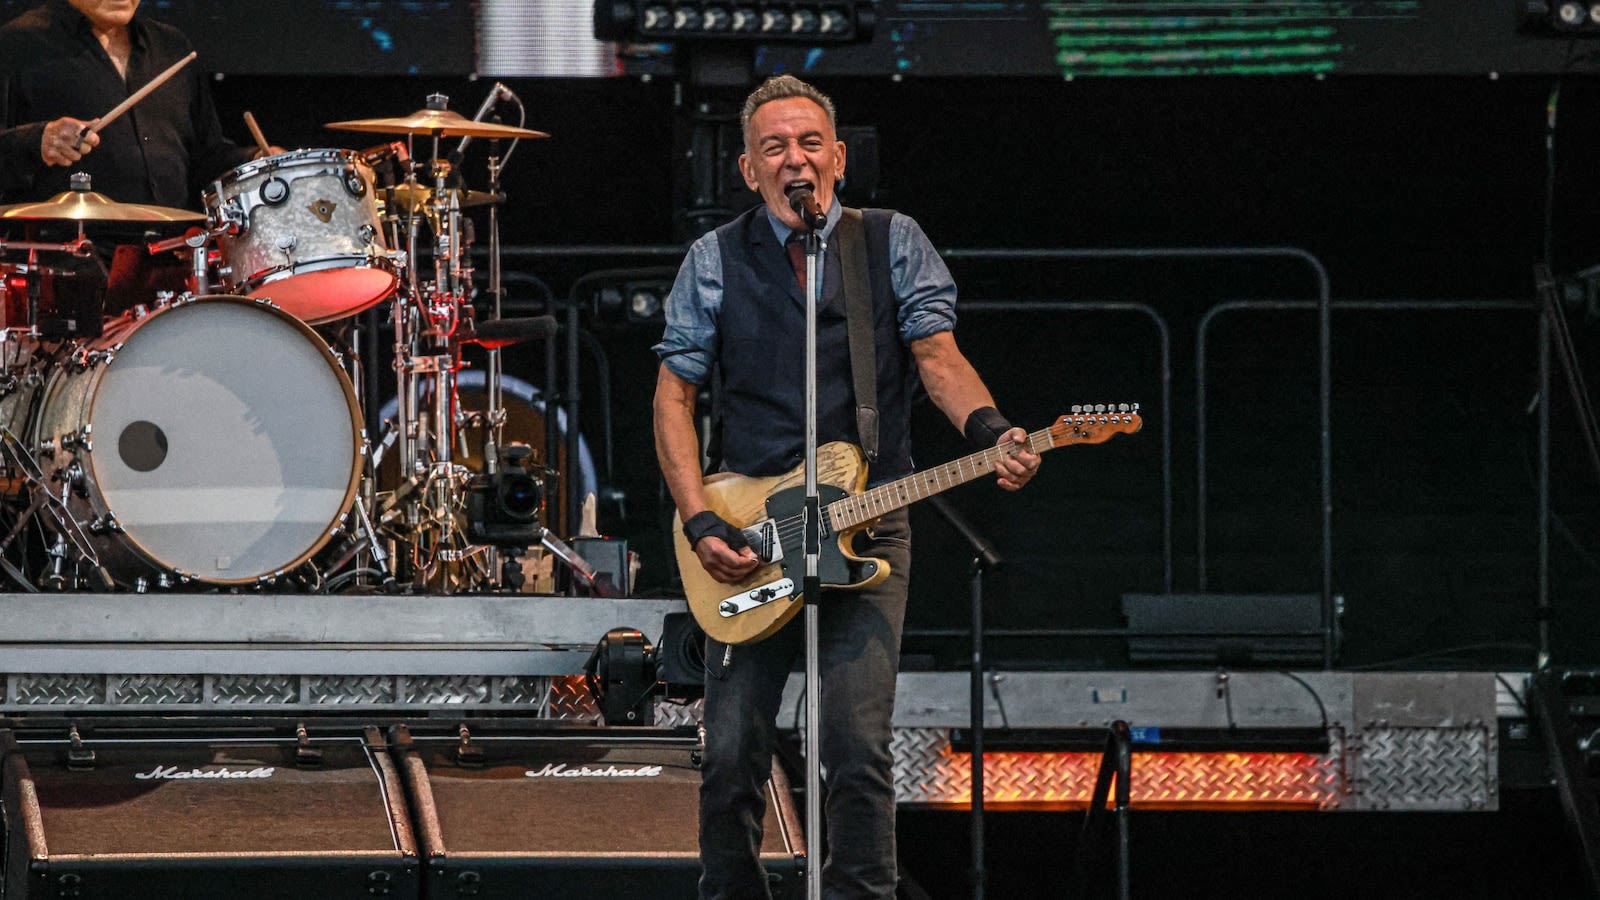 Bruce Springsteen promises fans 'we will be back' after postponing shows due to 'vocal issues'